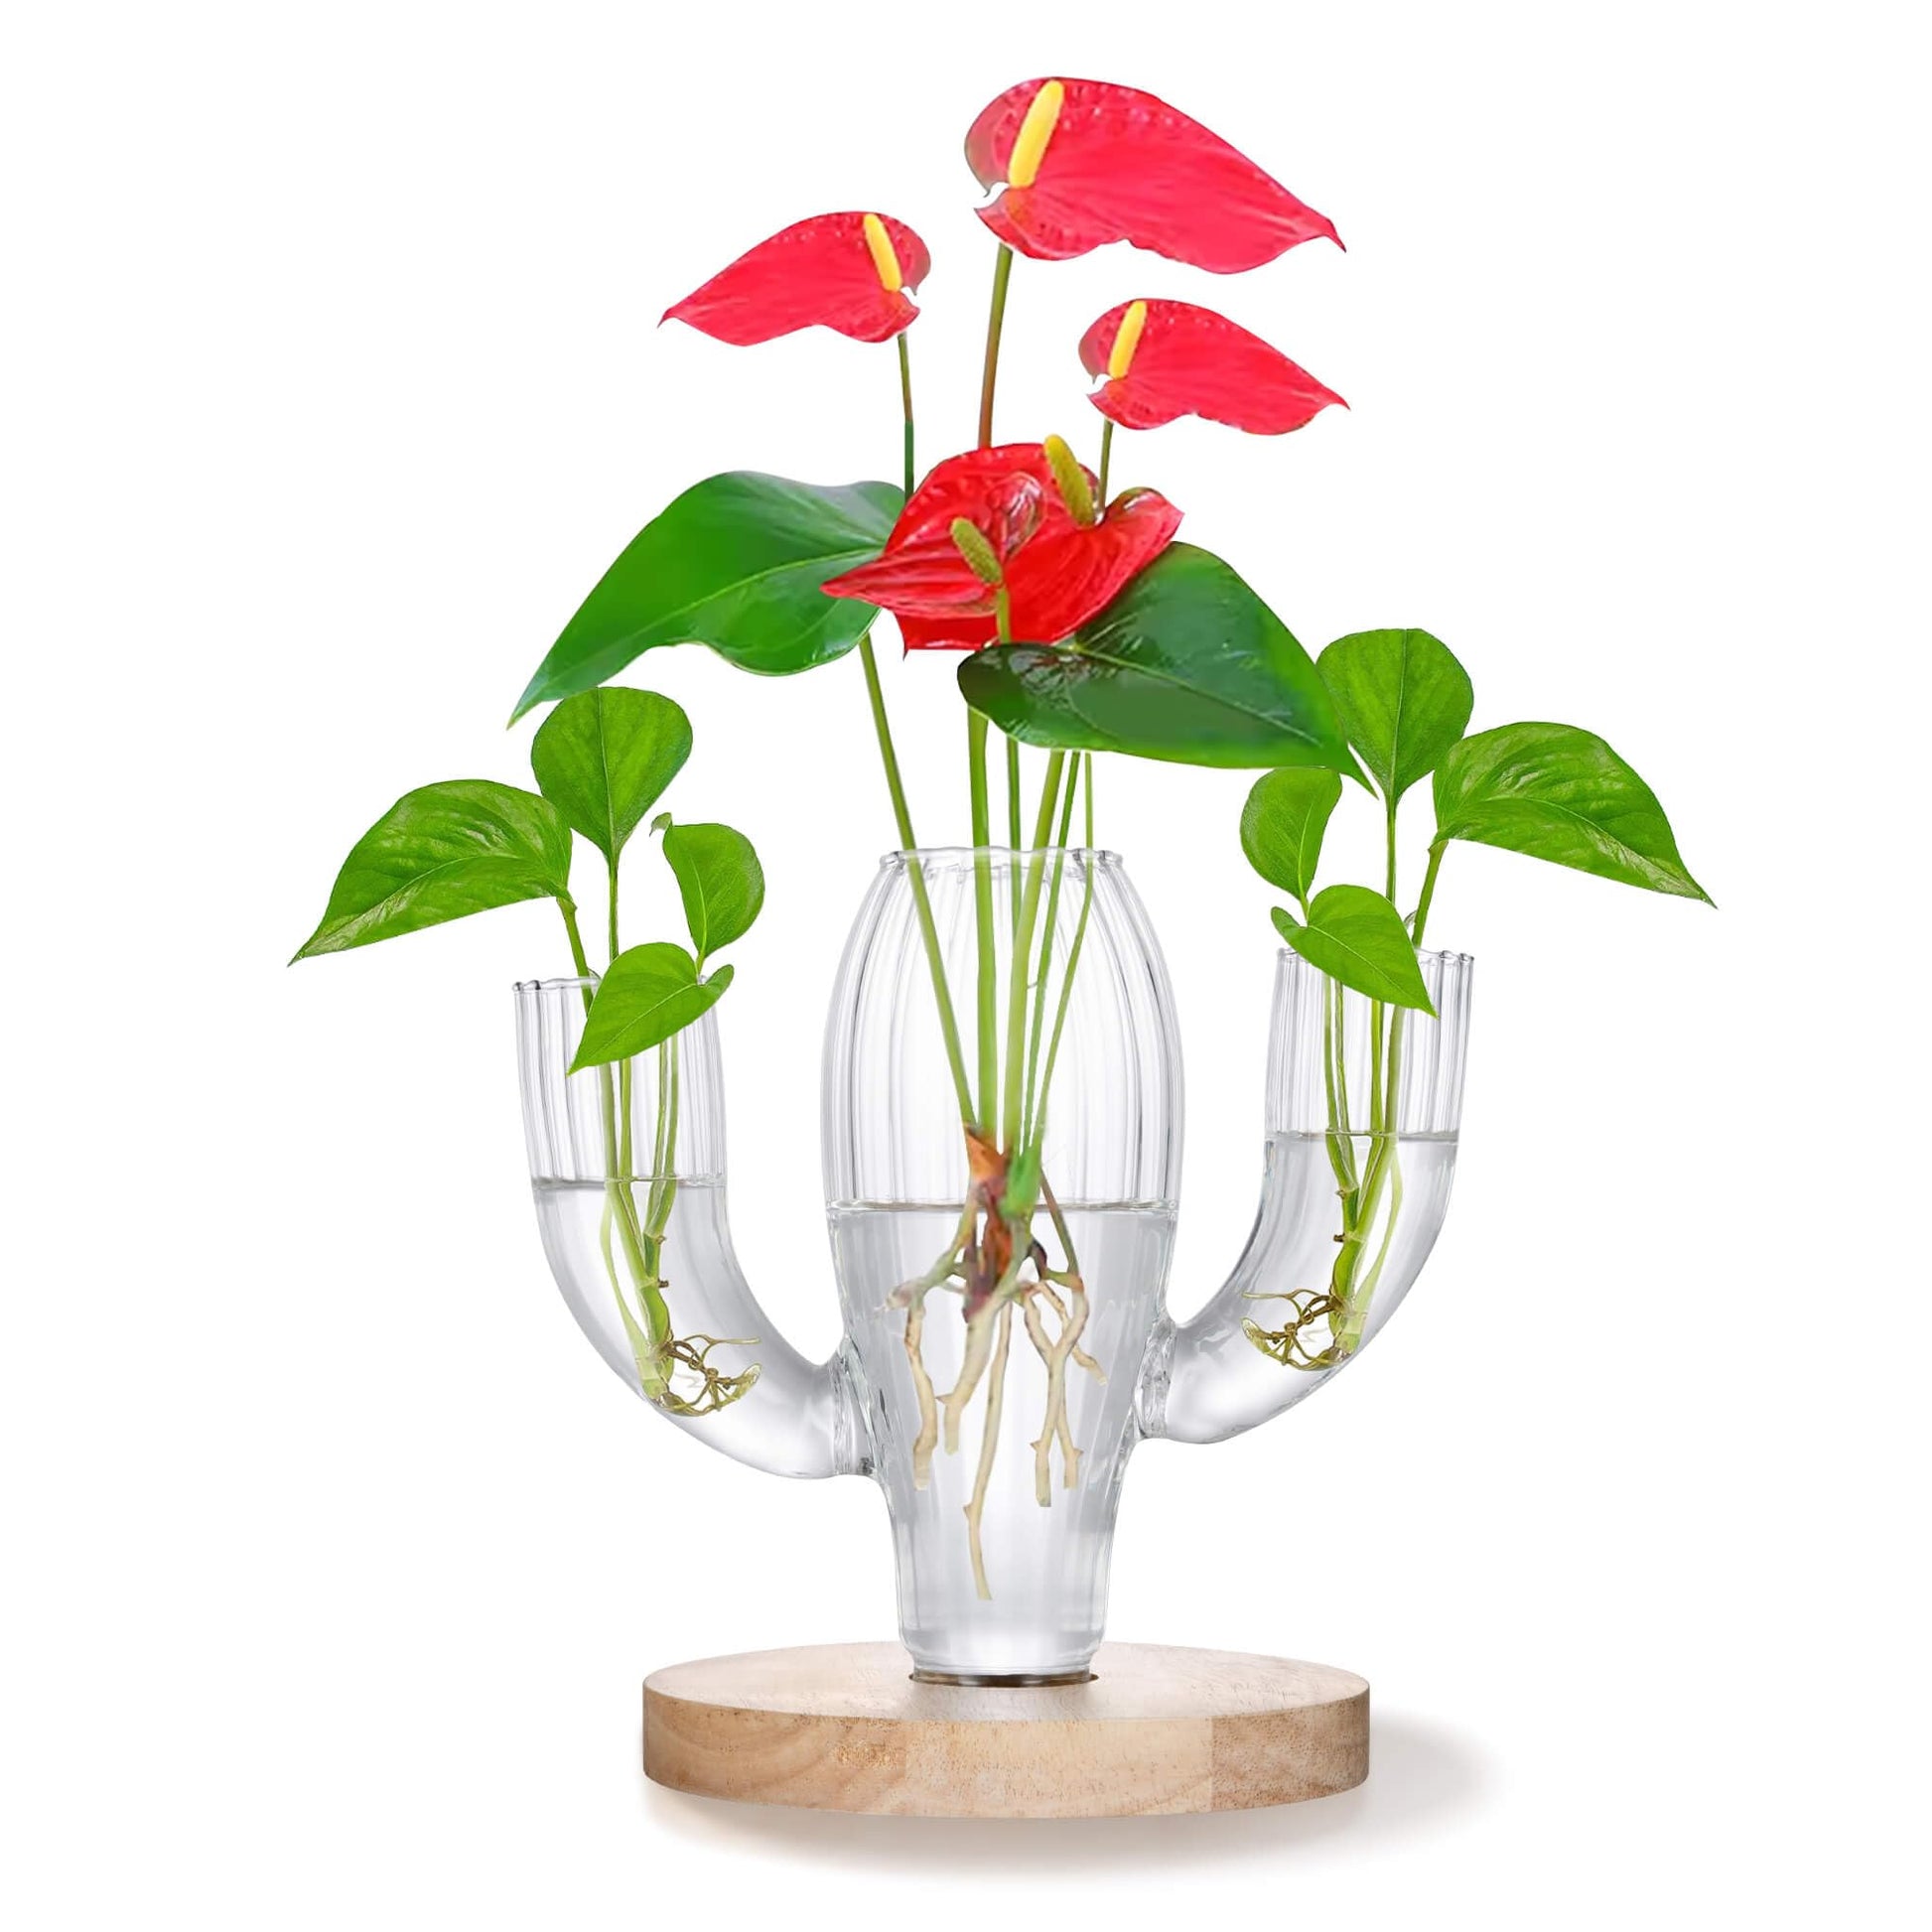 SuJolly Plant Propagation Stations, Unique Cactus-Shaped Plant Propagating Vase, 3 Independent Areas for Various Plants, Gardening & Housewarming Gifts for Plant Lovers, Home or Office Decor - Plantonio